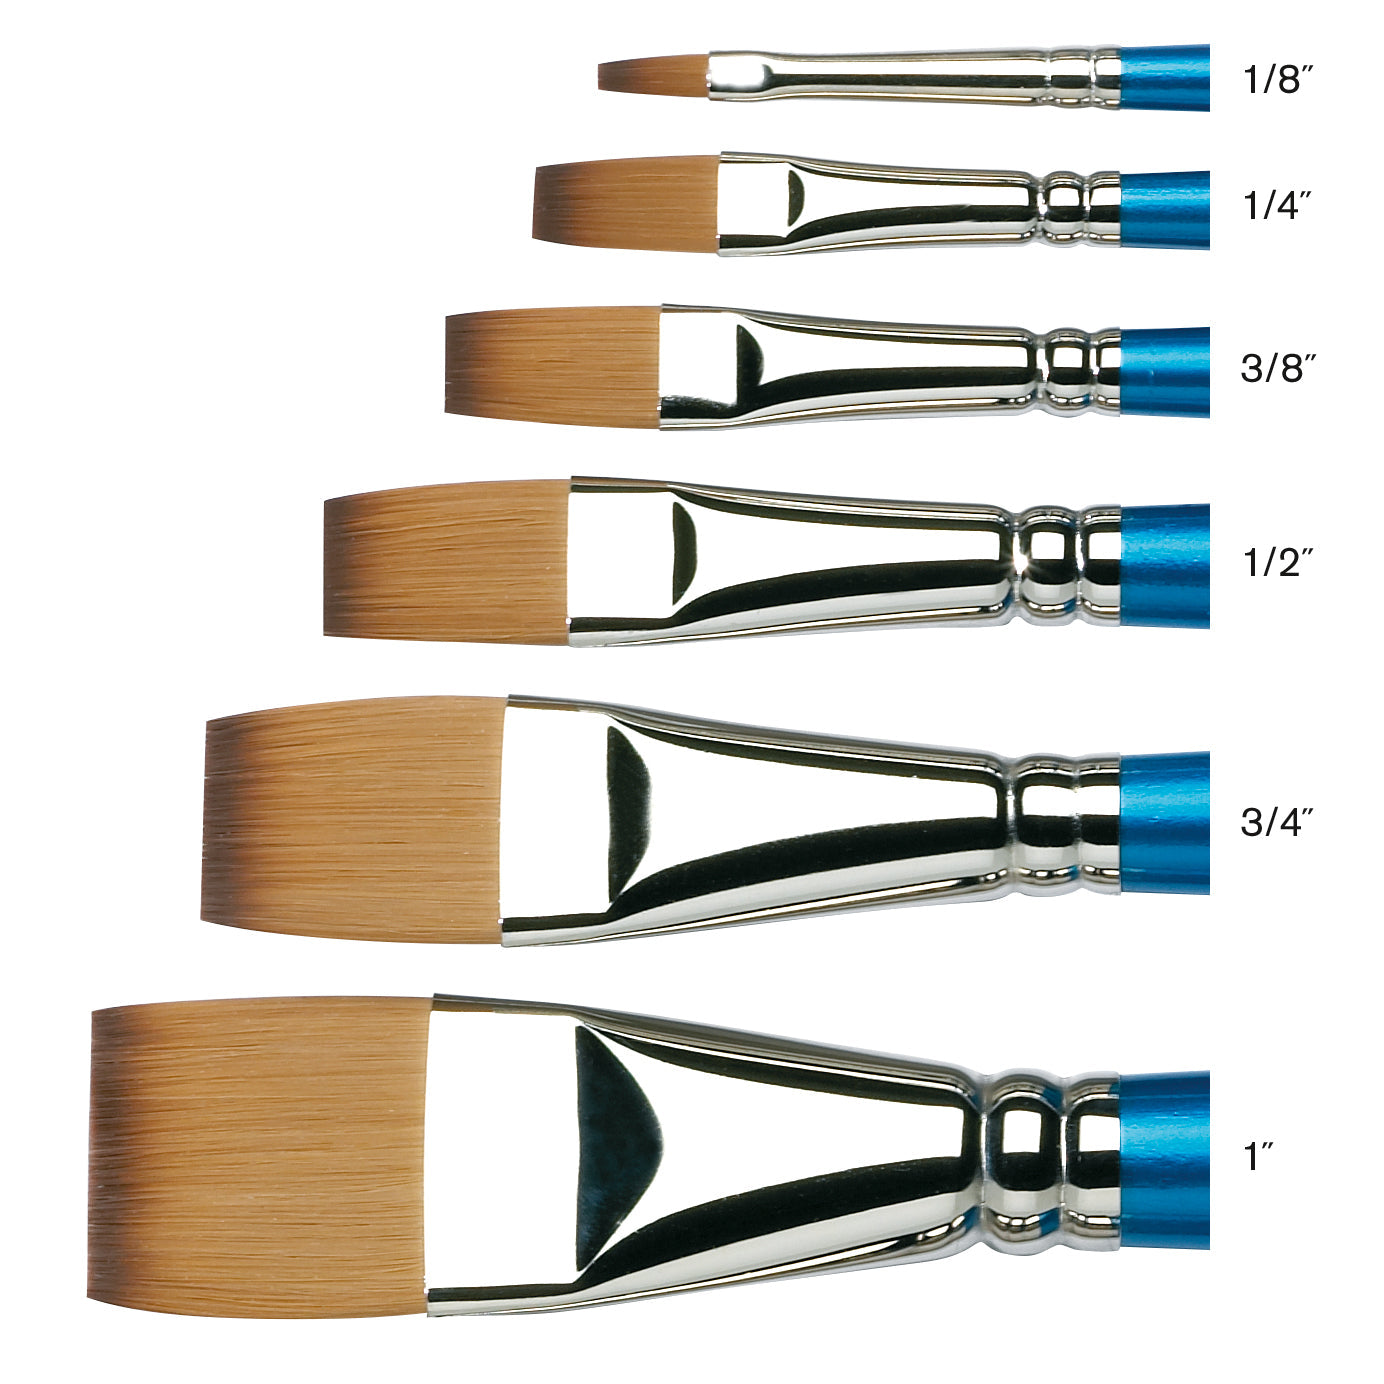 Artists' Cotman Watercolor Brushes - One Stroke (Winsor & Newton)